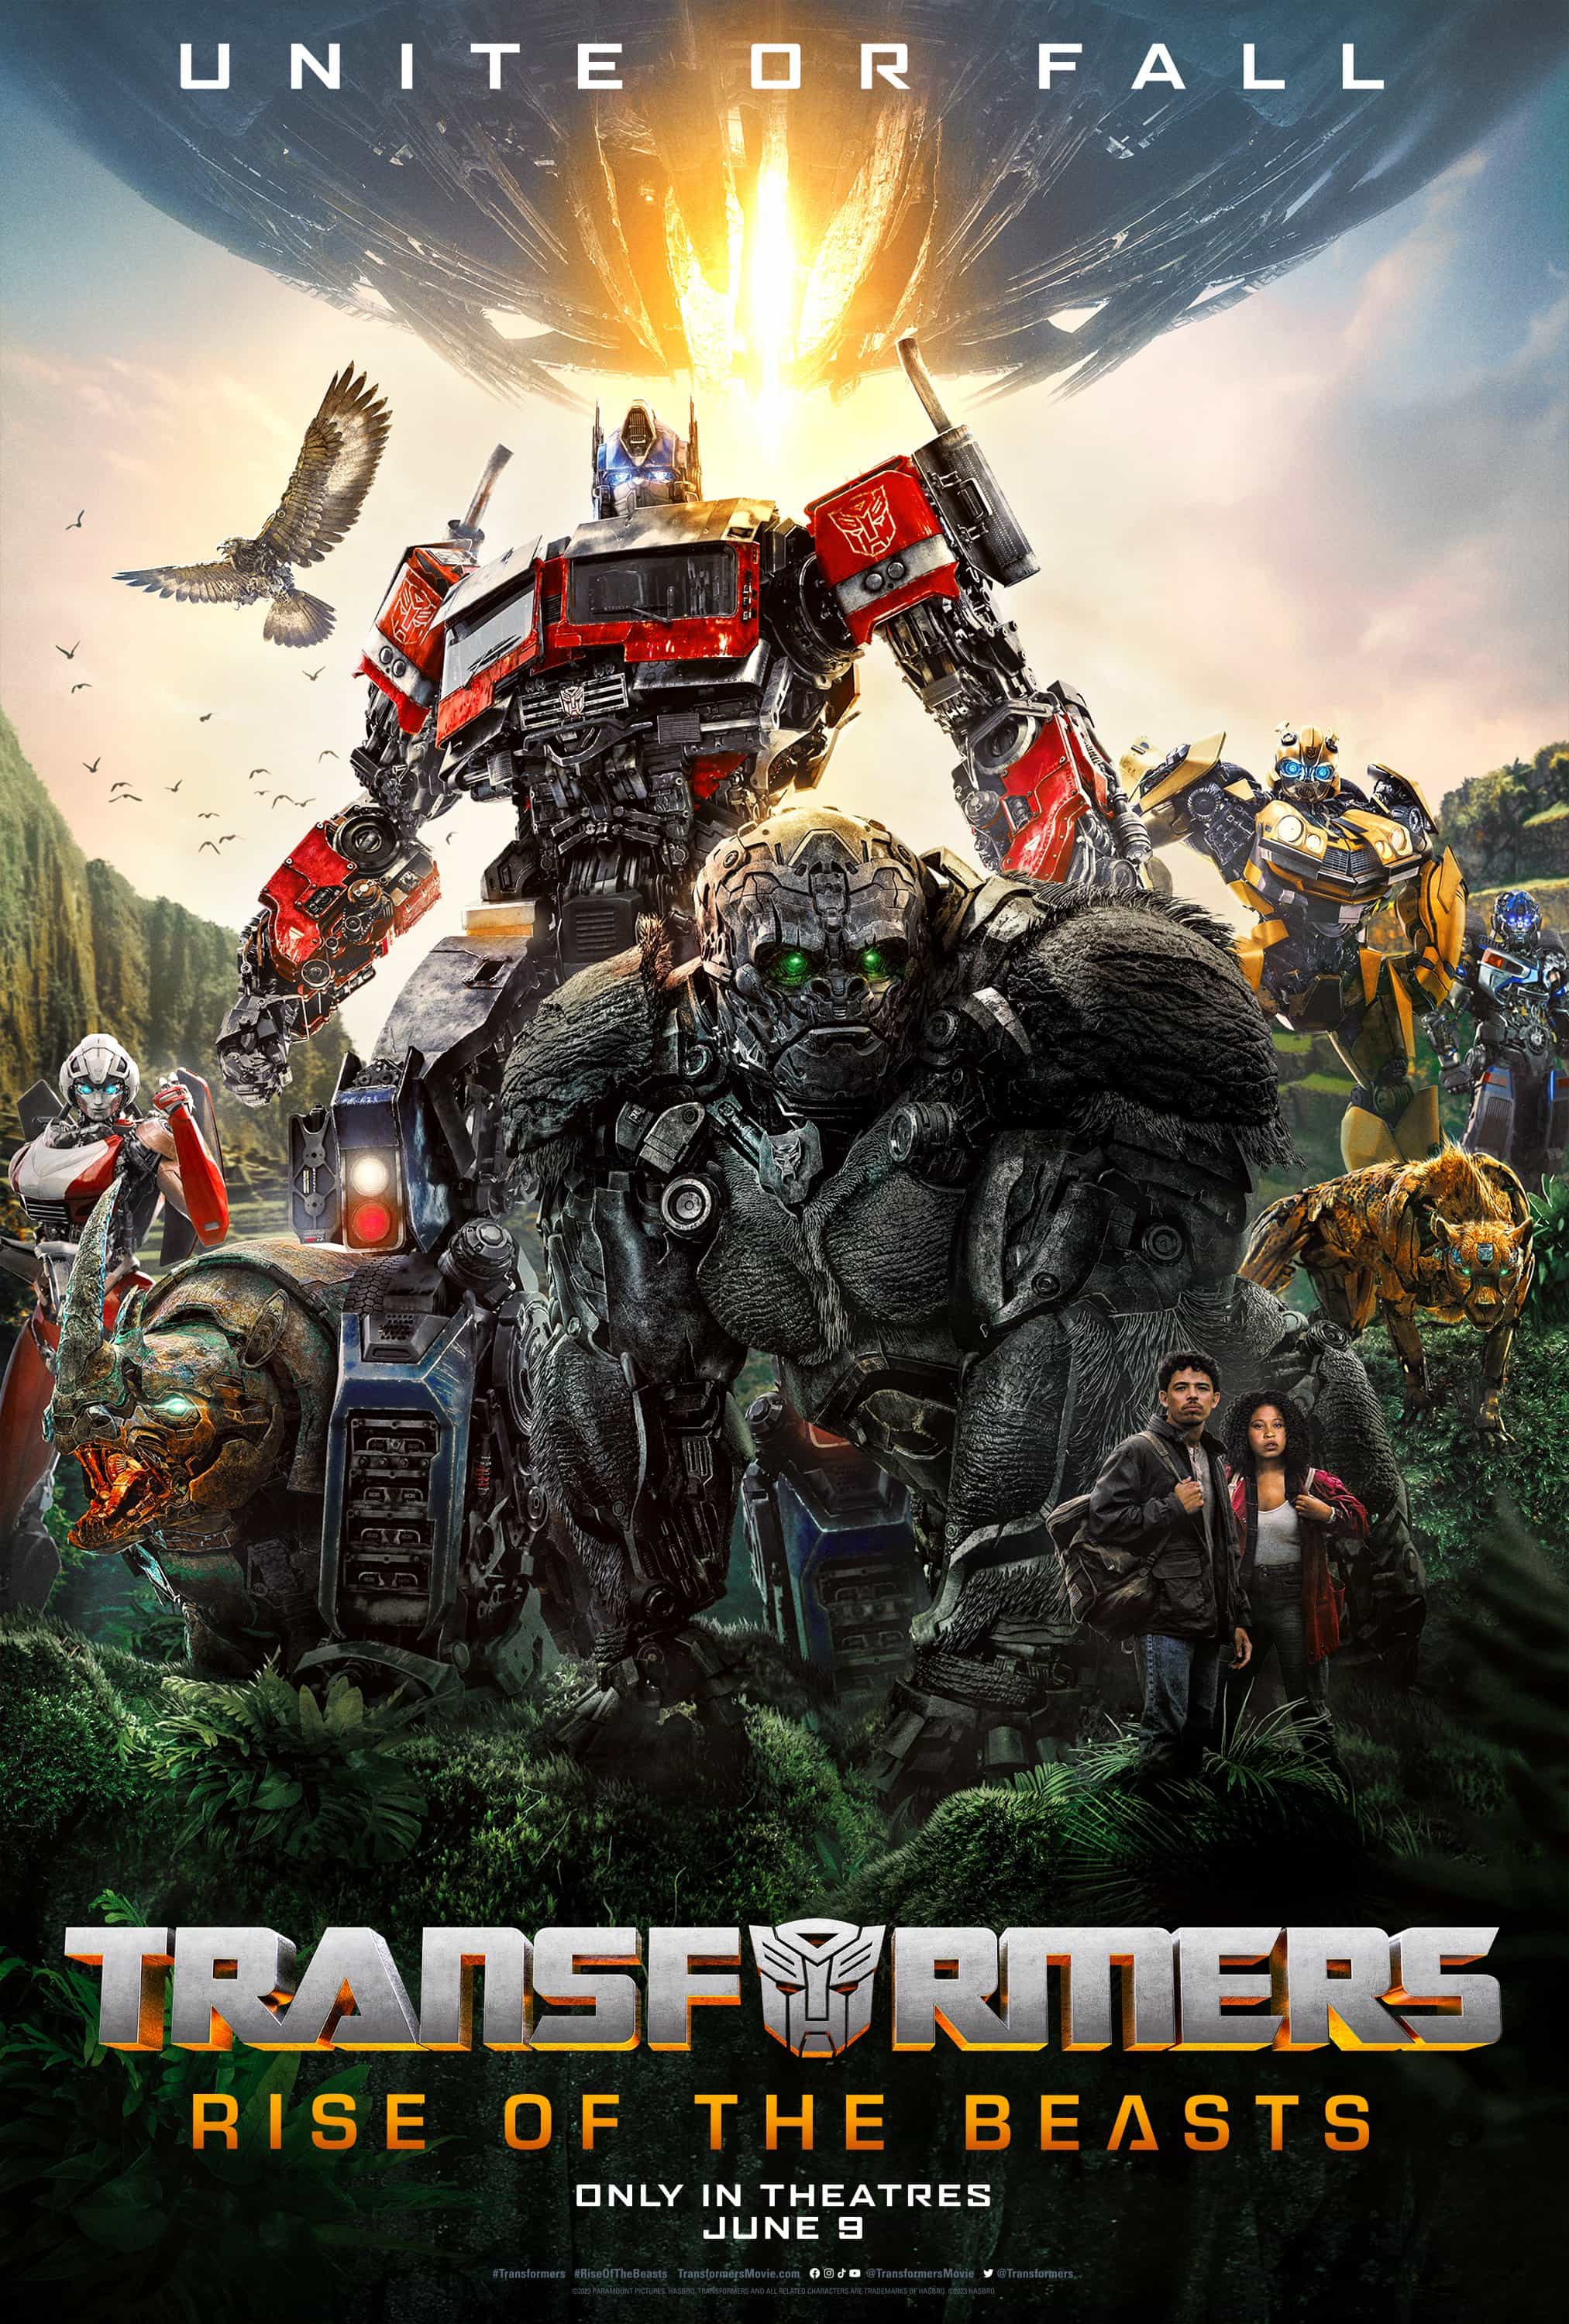 Check out the new trailer for upcoming movie Transformers: Rise of the Beasts which stars Michelle Yeoh and Pete Davidson - movie UK release date 9th June 2023 #transformersriseofthebeasts